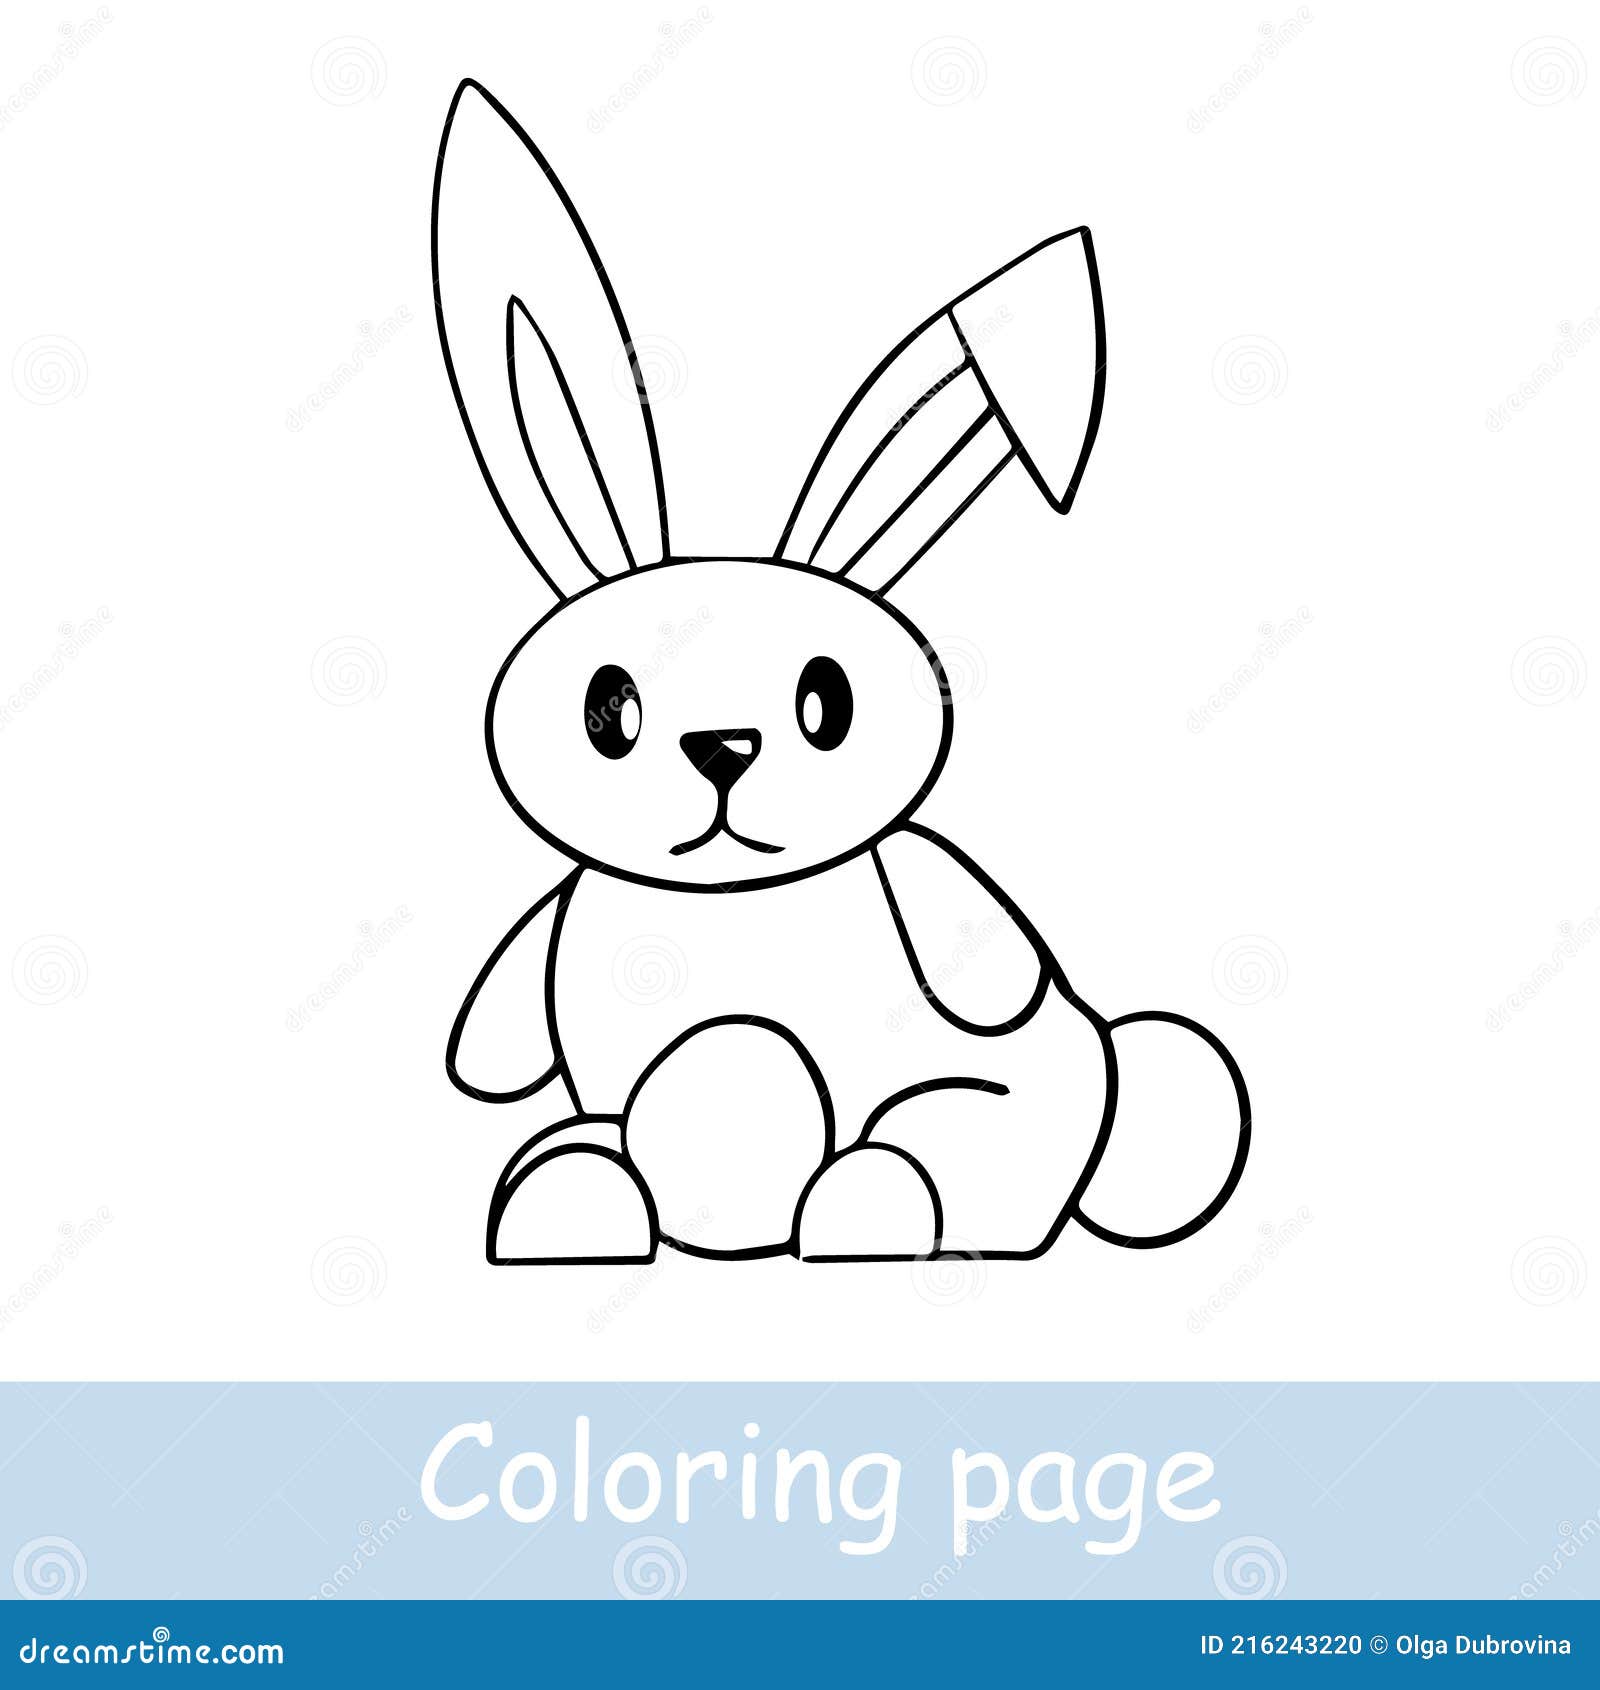 Cute Cartoon Hare Coloring Page. Learn To Draw Animals. Vector Line Art,  Hand Drawing. Coloring Book for Children Stock Vector - Illustration of  character, card: 216243220